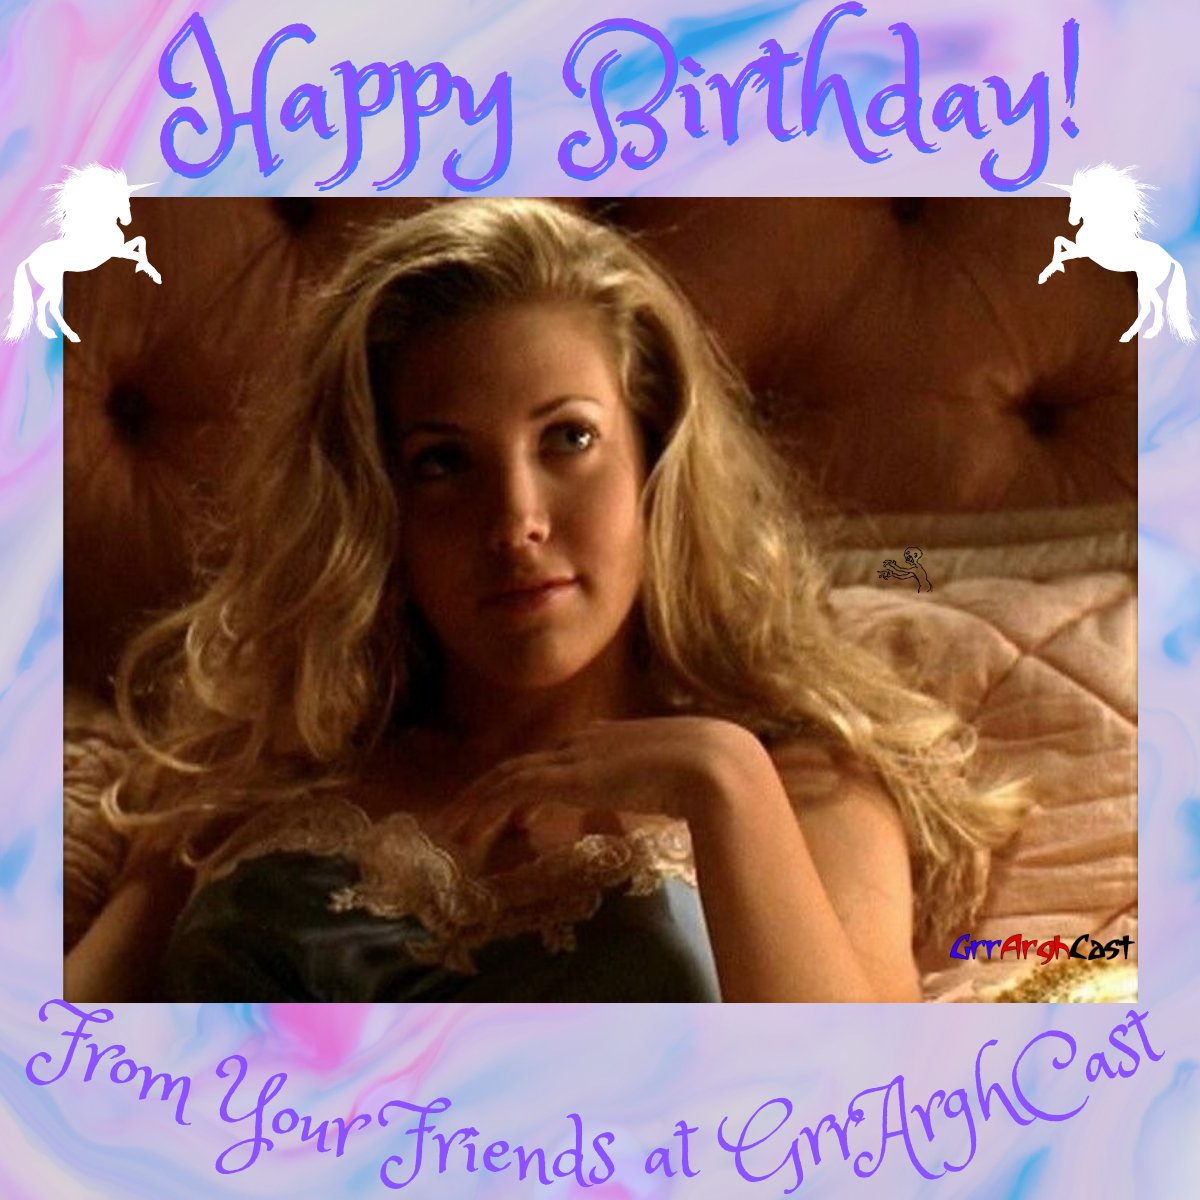 Wishing a very happy birthday to the stunningly beautiful and incredibly talented, Mercedes McNab! 